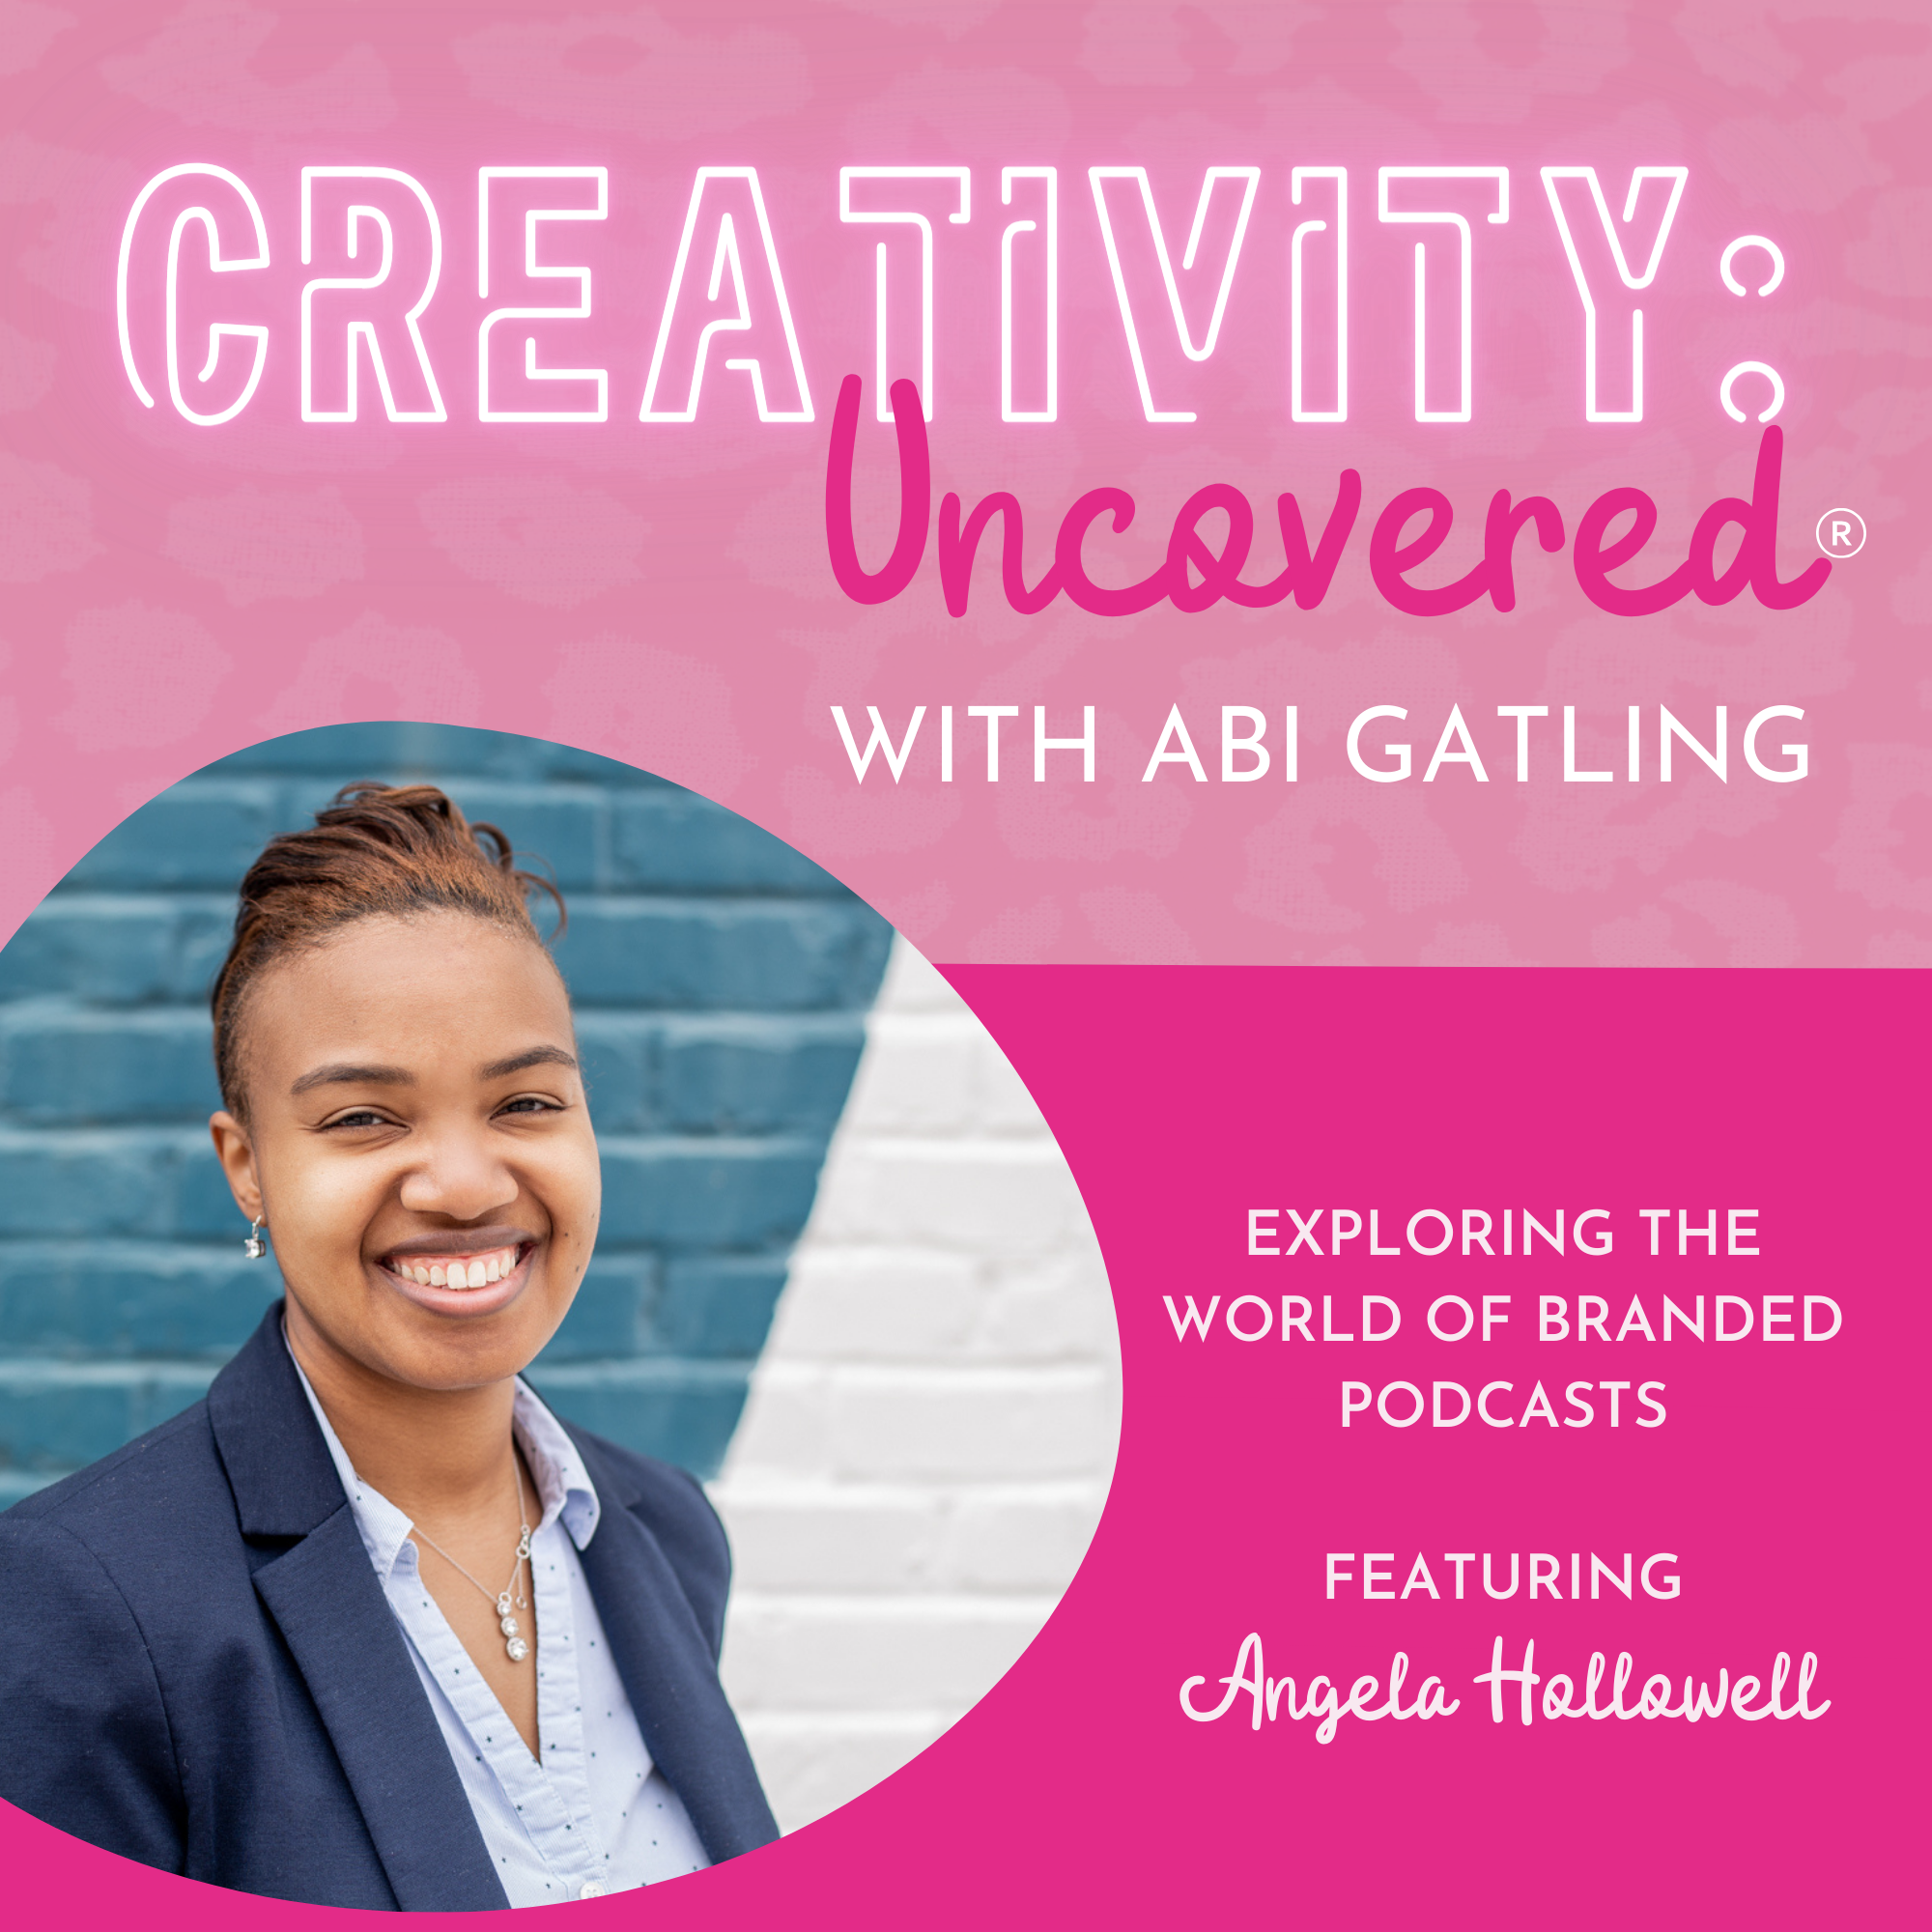 Creativity: Uncovered podcast episode graphic featuring guest Angela Hollowell